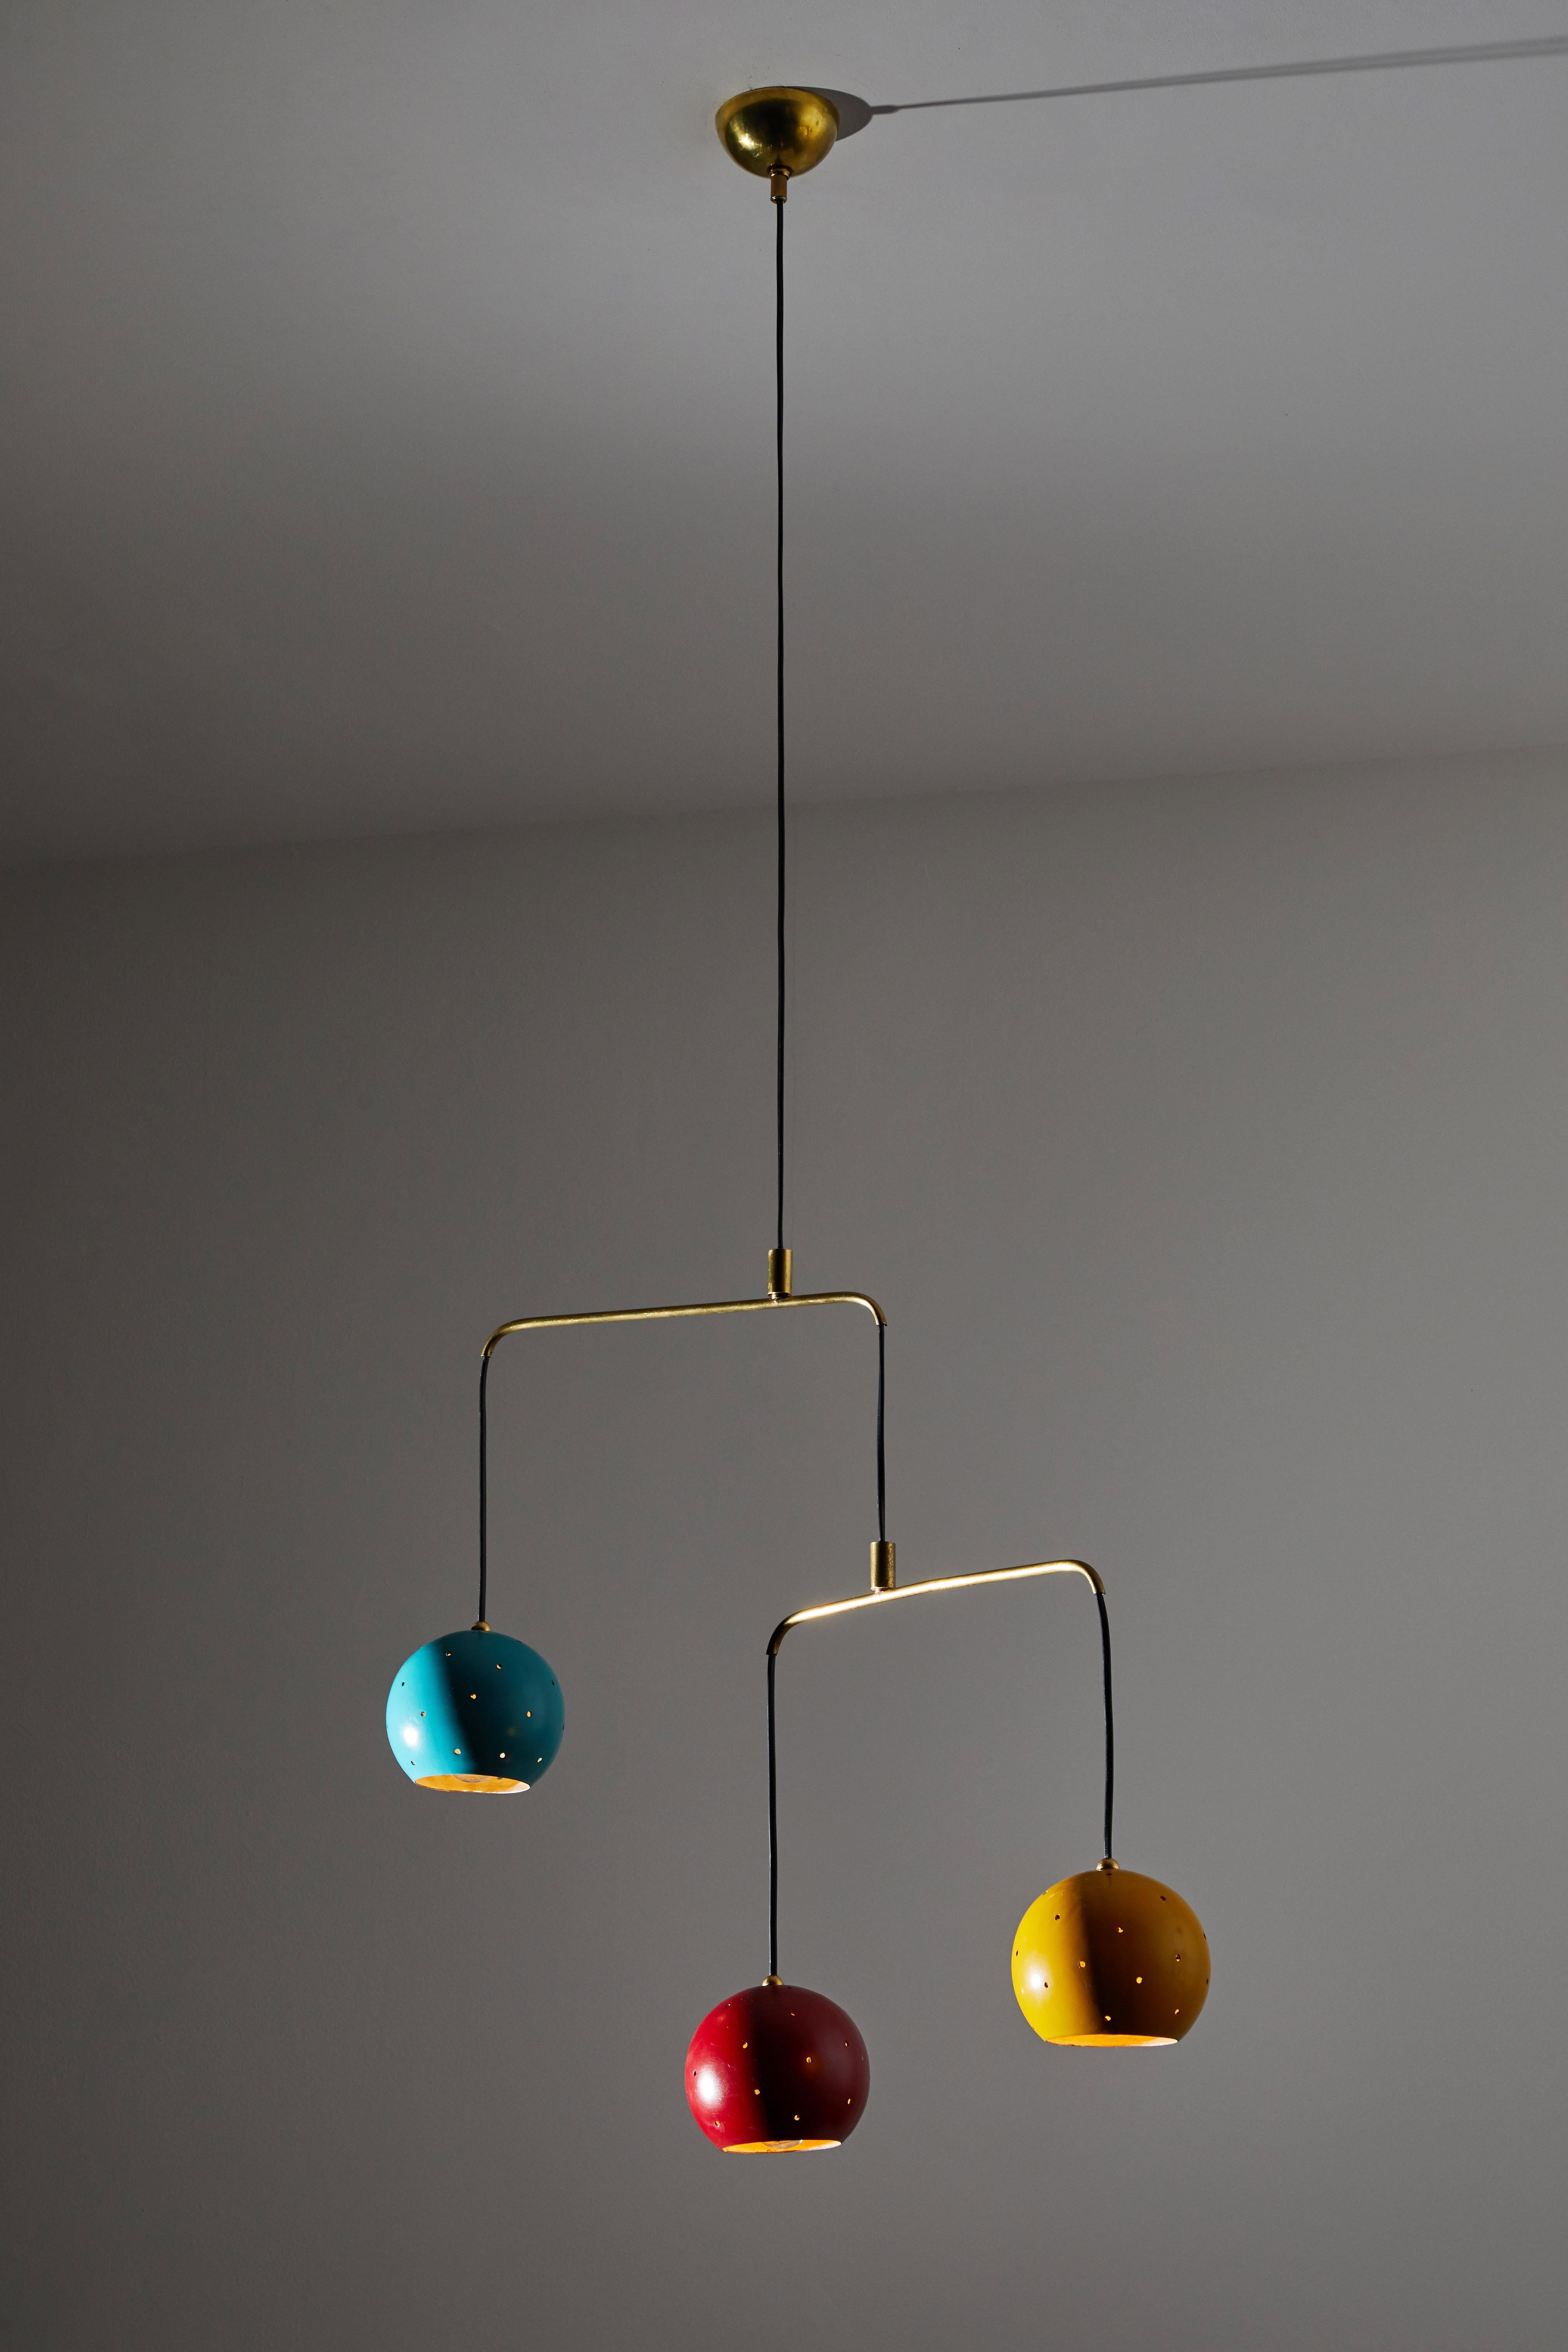 Mobile Chandelier by Stilux. Manufactured in Italy, circa 1950s. Enameled aluminum, brass. Rewired for U.S. junction boxes. Custom brass ceiling plate. Takes three E27 100w maximum bulbs.